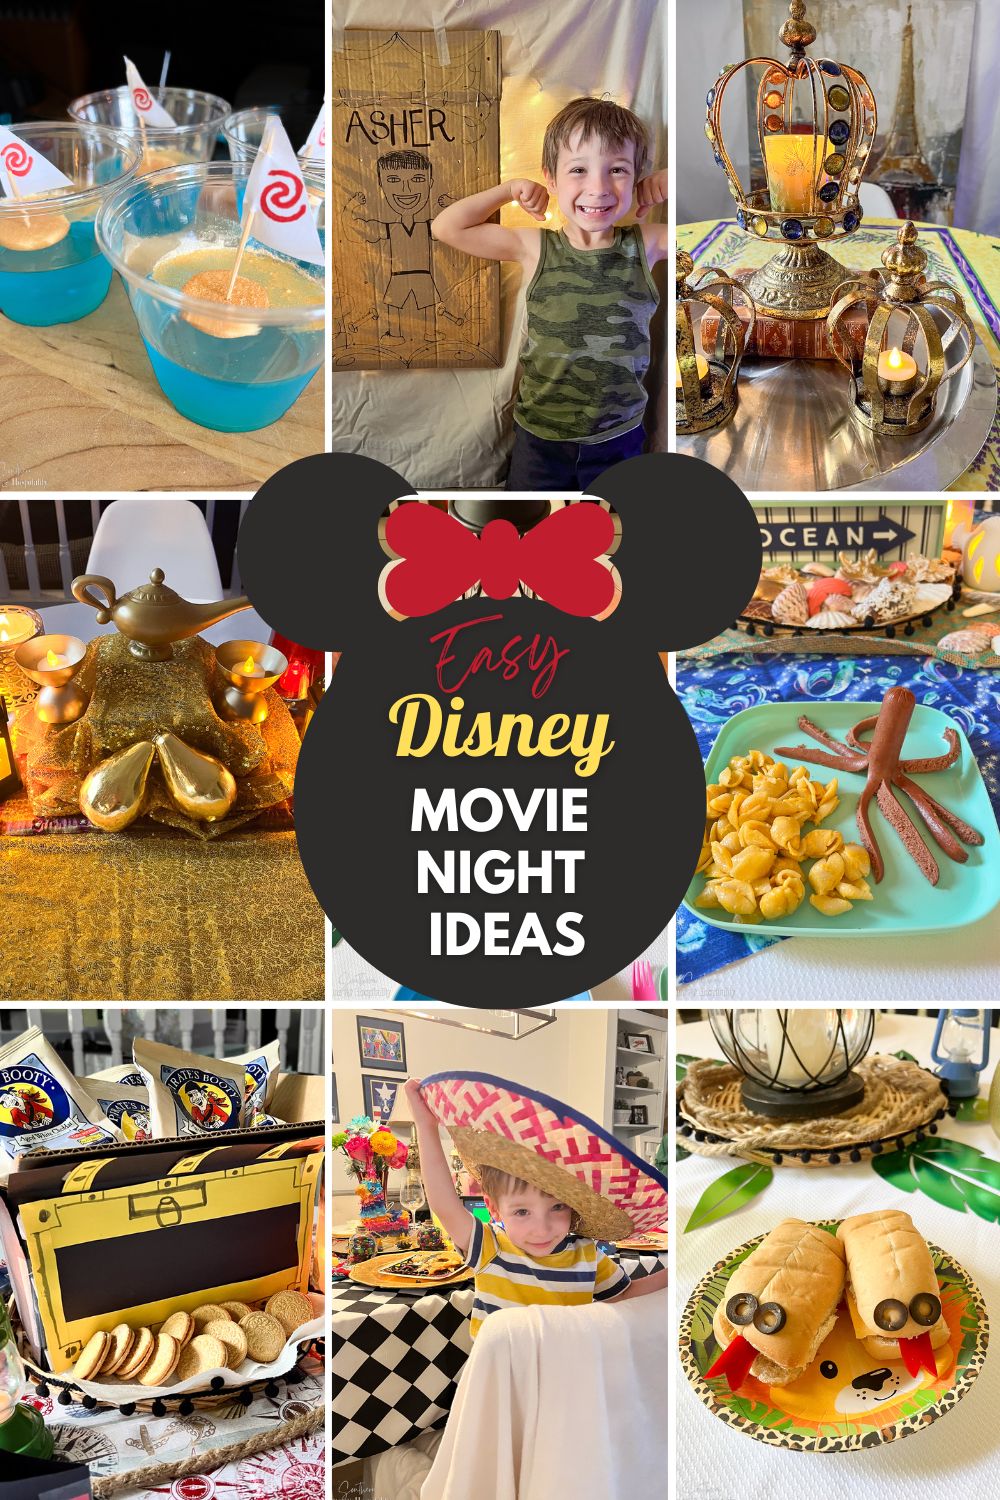 15 Easy Disney Dinner and Movie Night Ideas for Magical Memories